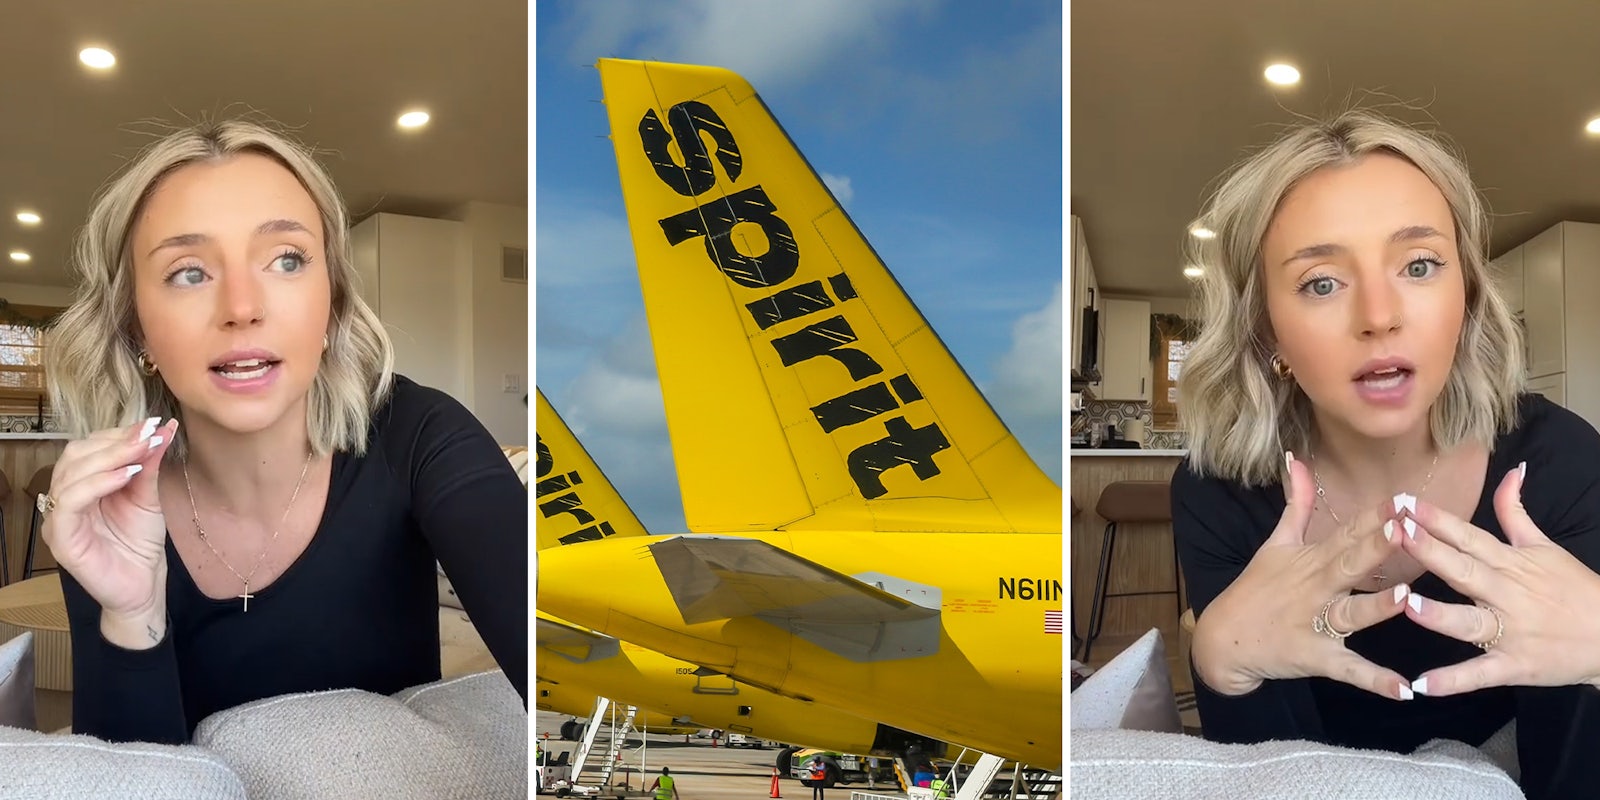 Spirit Airlines passenger brings his own parachute to the flight ‘just in case’